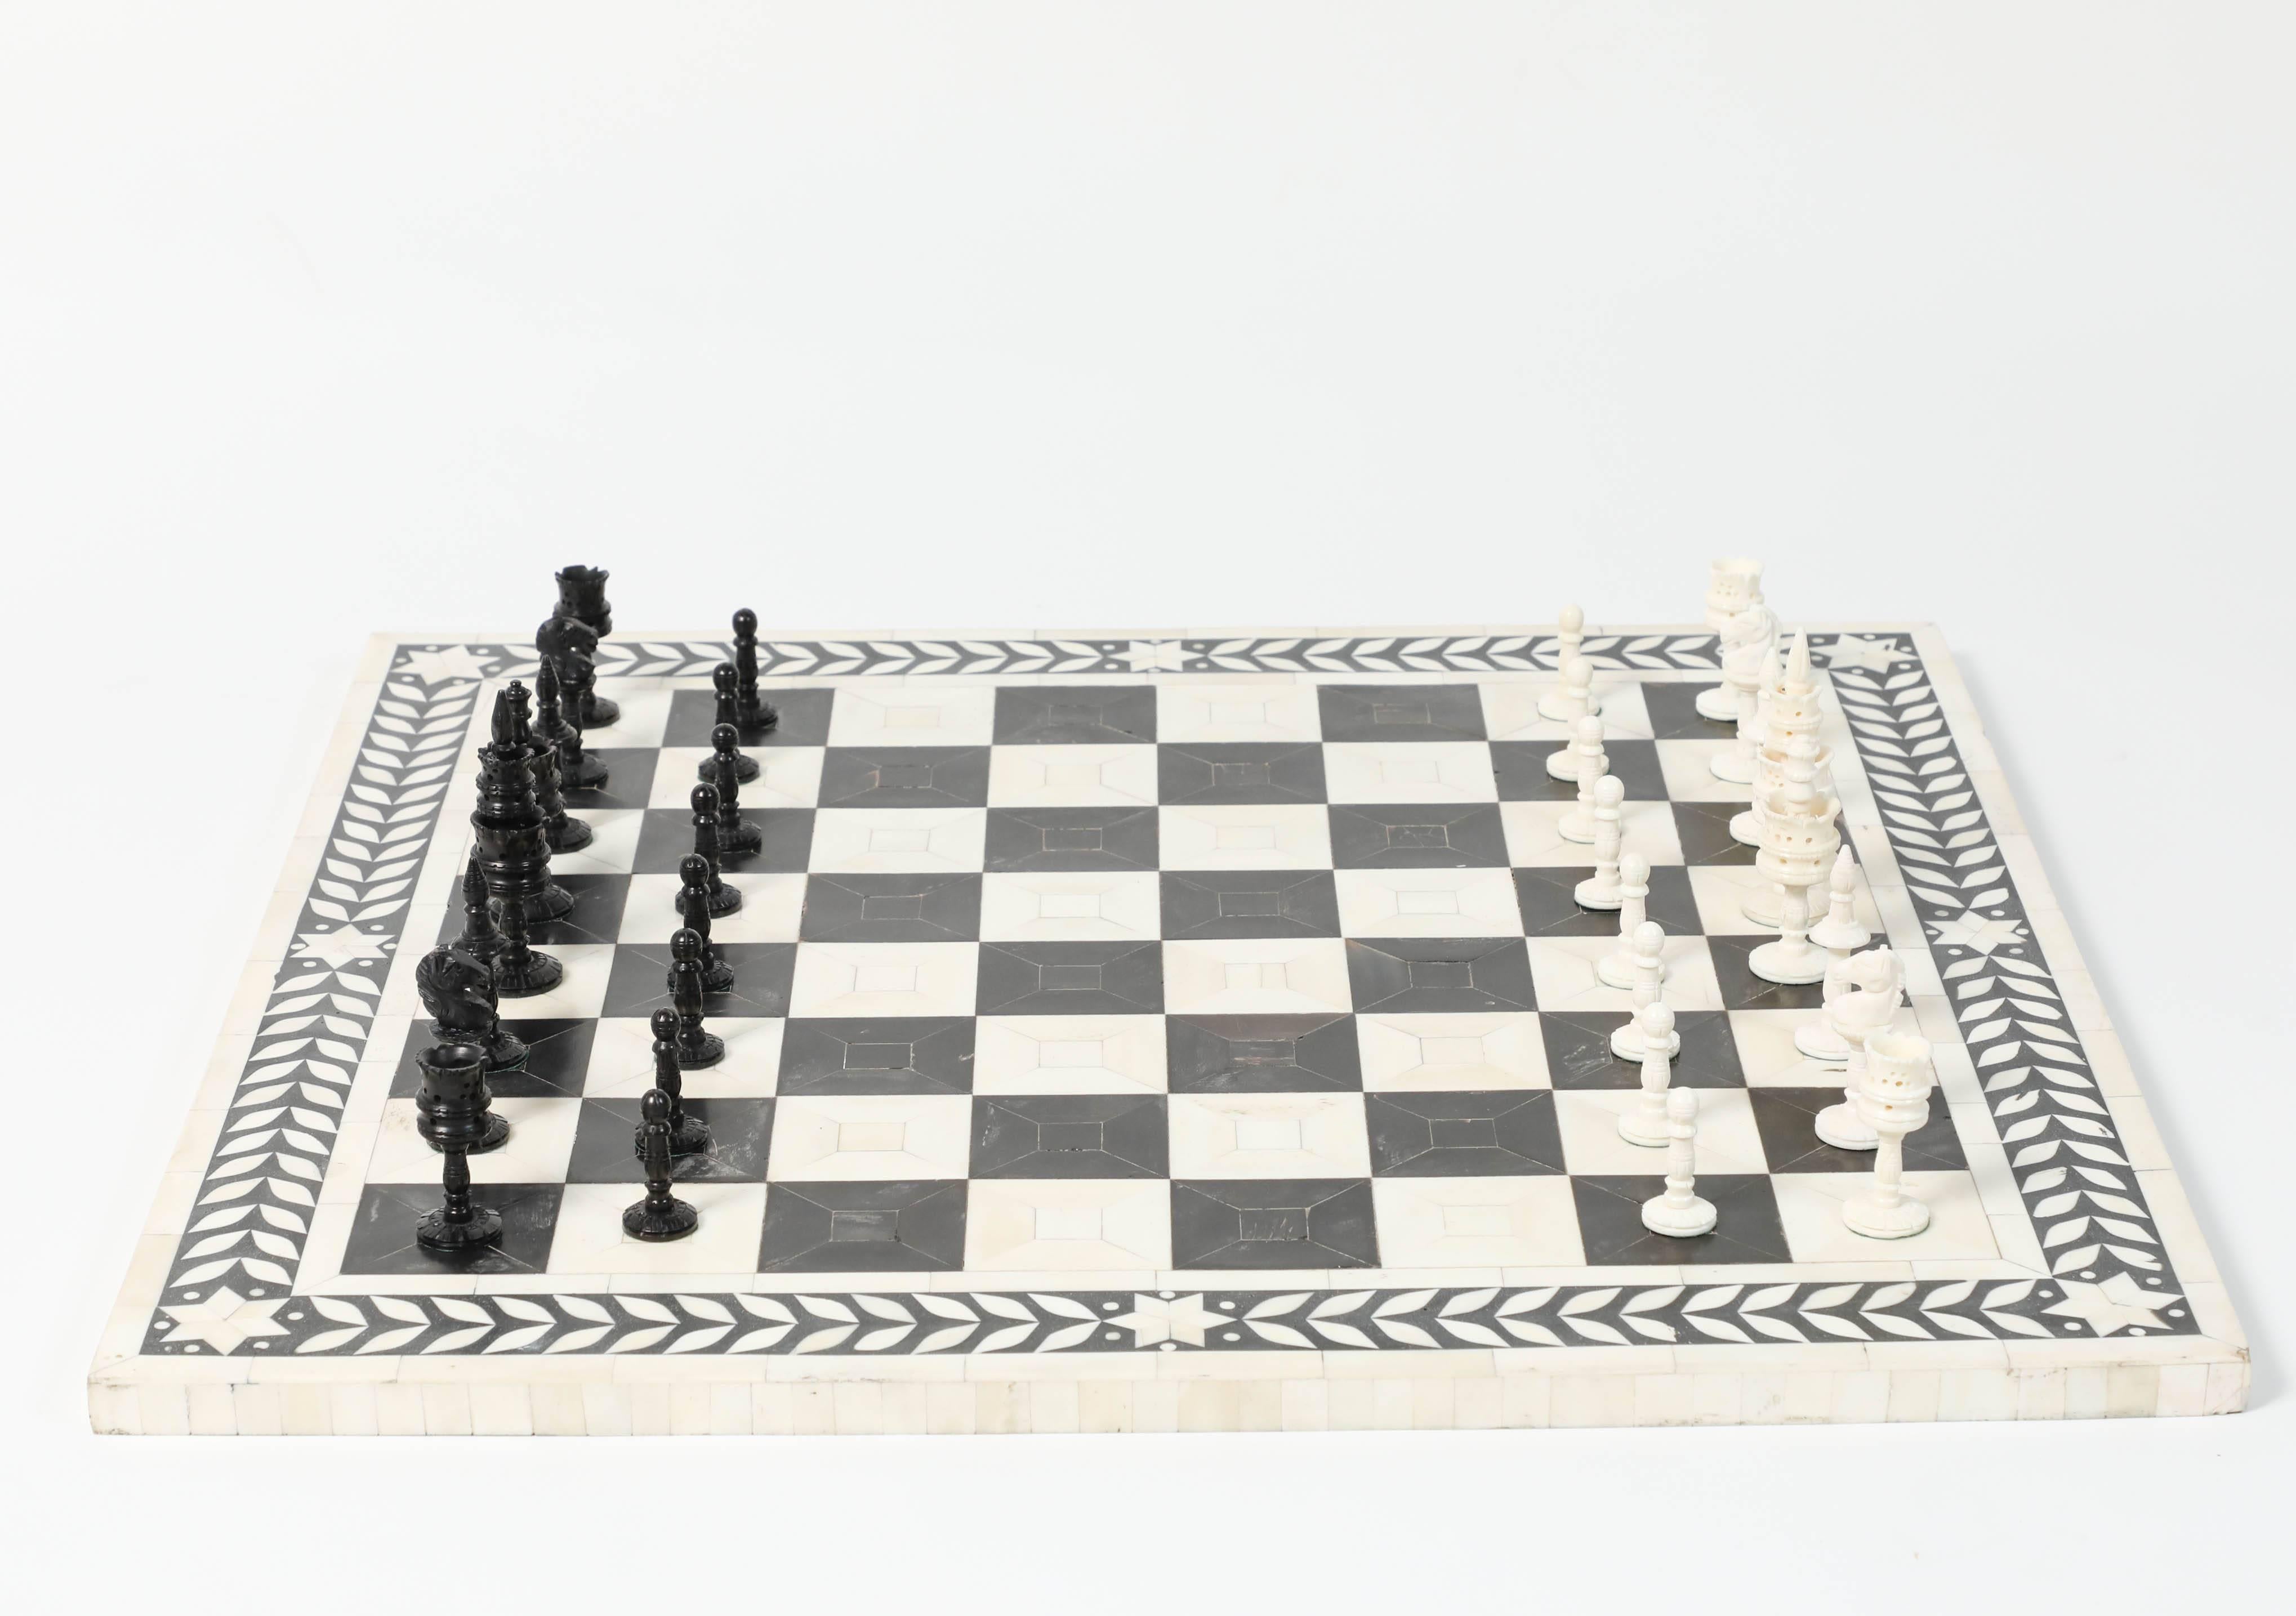 Large Vizagapatam chess set with elaborately ox bone hand-carved chess pieces.
The set was made in East India in Vizagapatam, region being one of the finest areas of its time for ivory carving. Specialties included inlay, carving and turning work